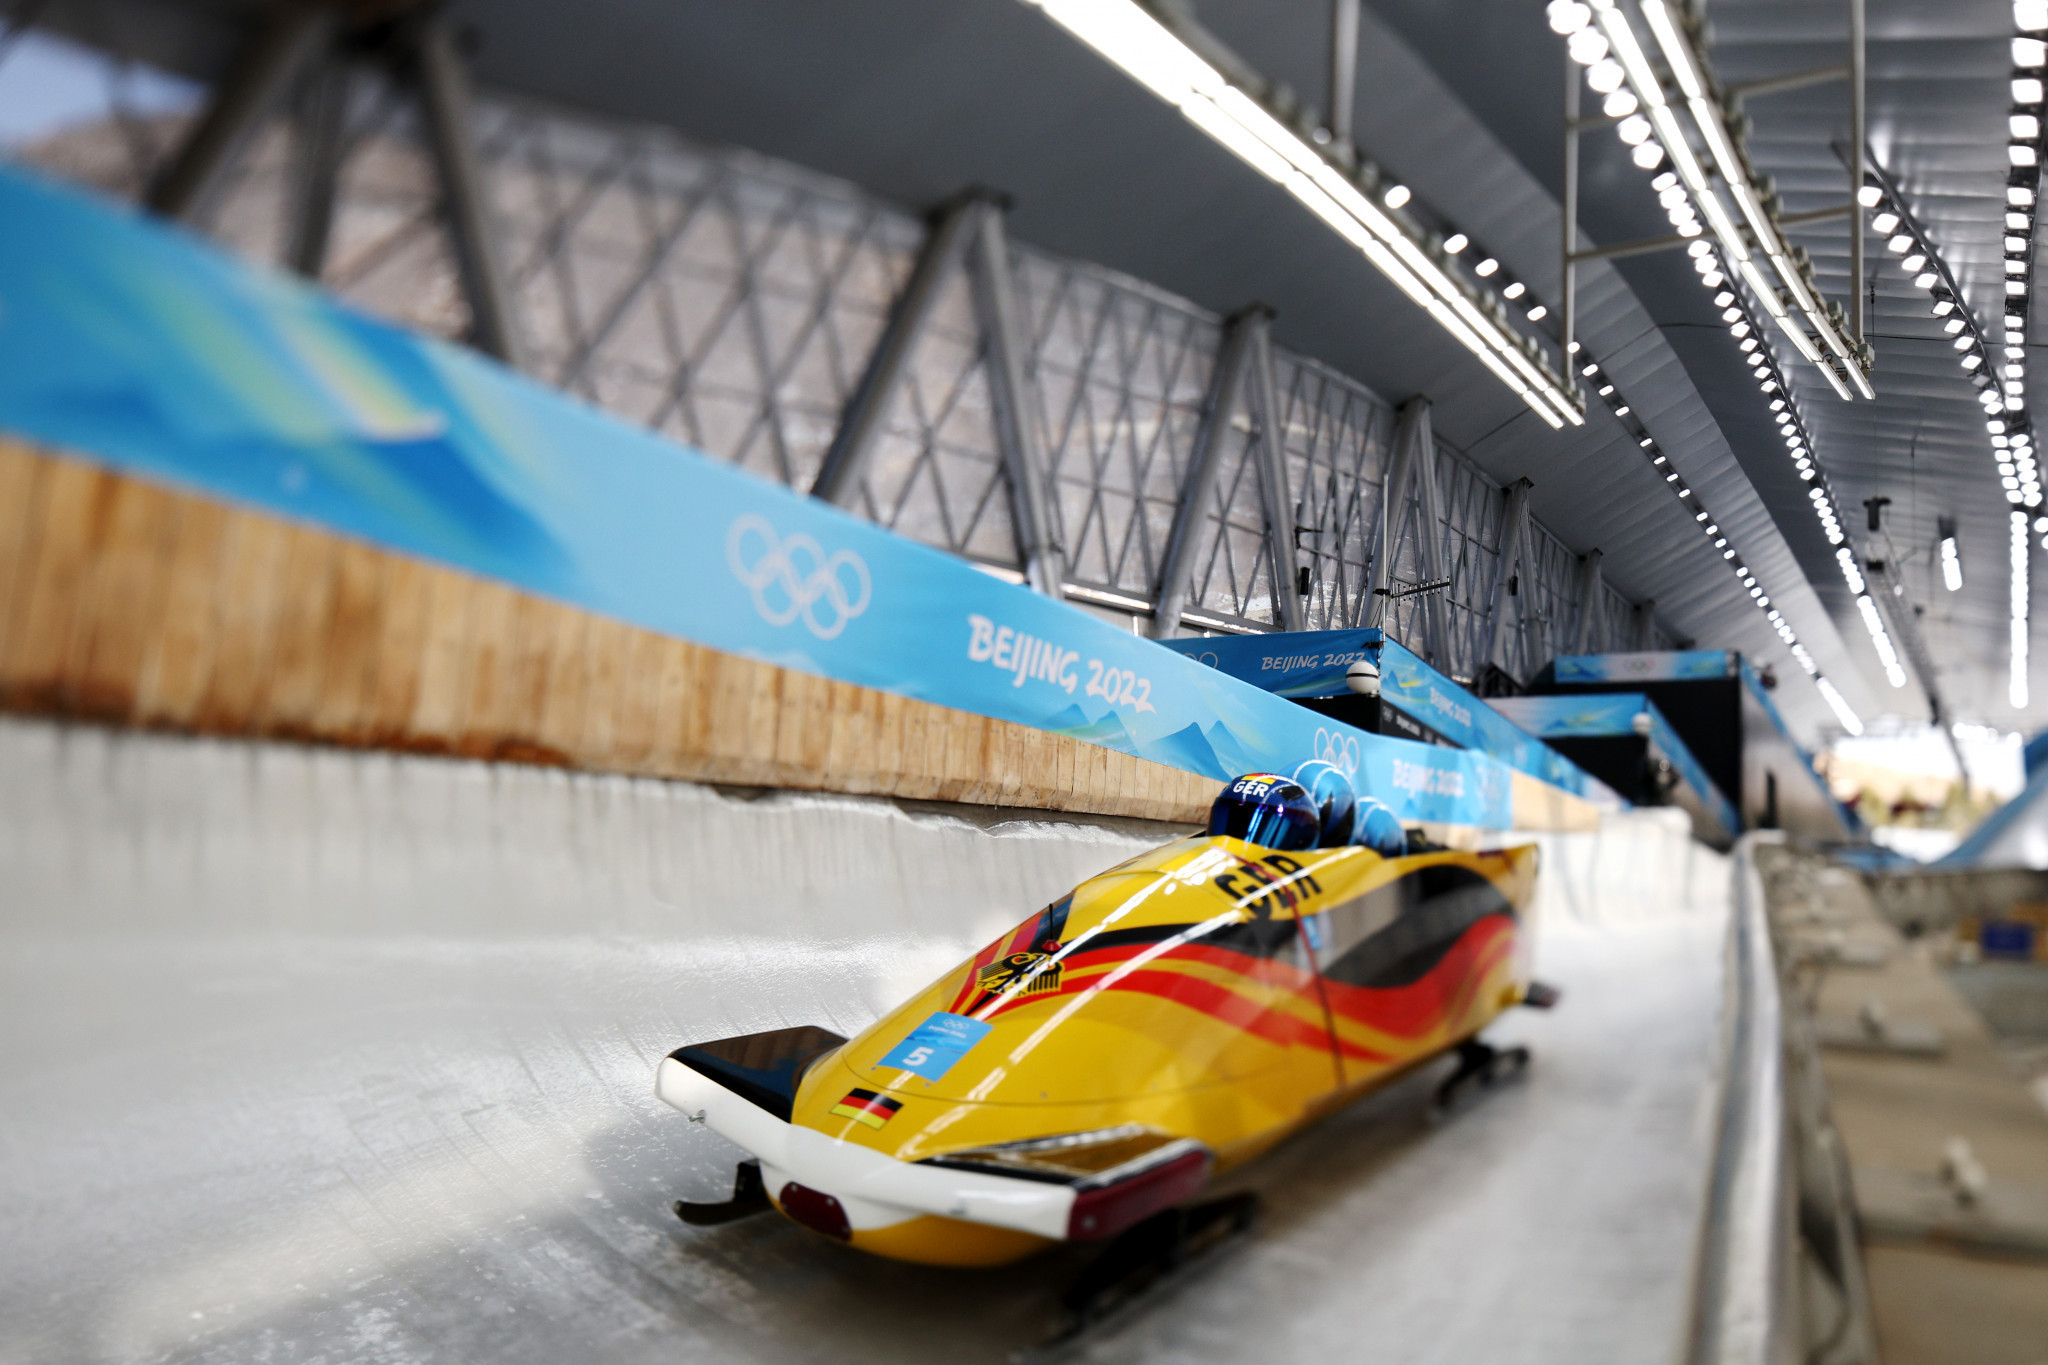 Bobsledder Francesco Friedrich played a major part in the German success story with two gold medals at Beijing 2022 ©Getty Images